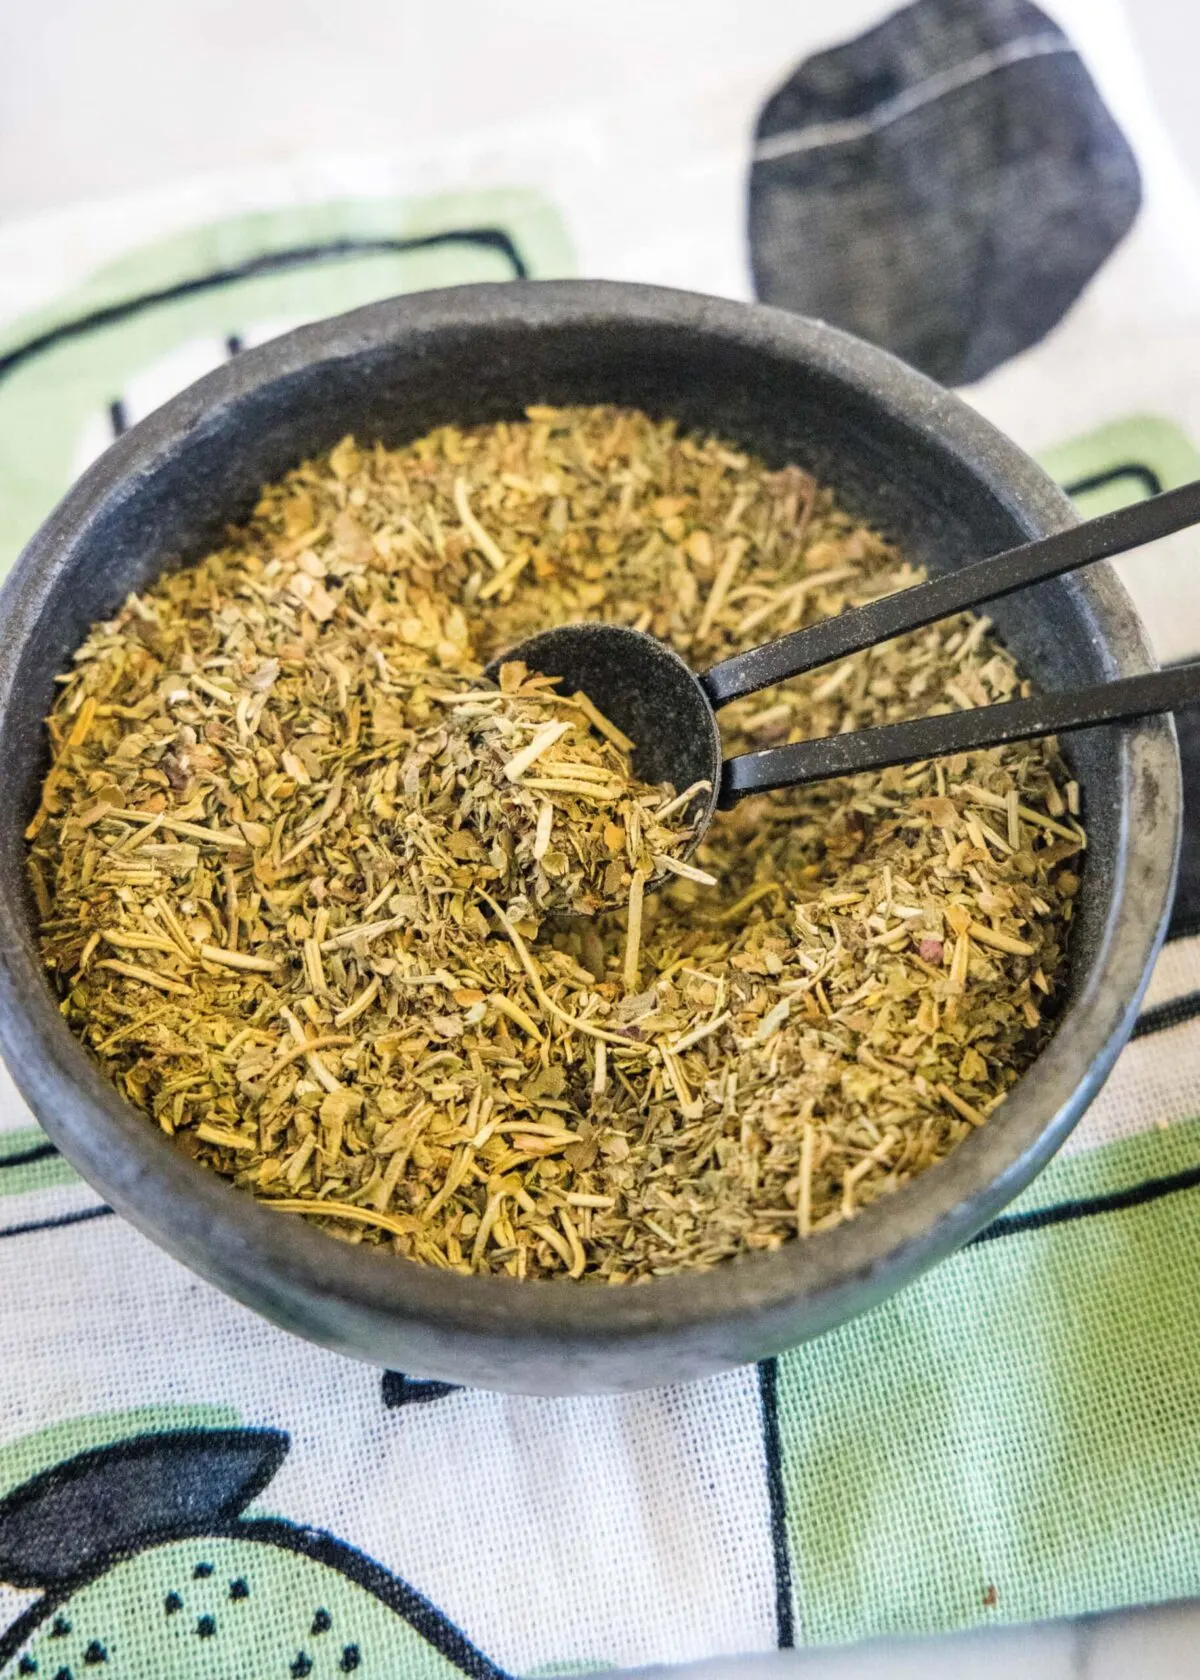 Close up overhead view of a bowl of Italian seasoning with a spoon in it, on a kitchen towel